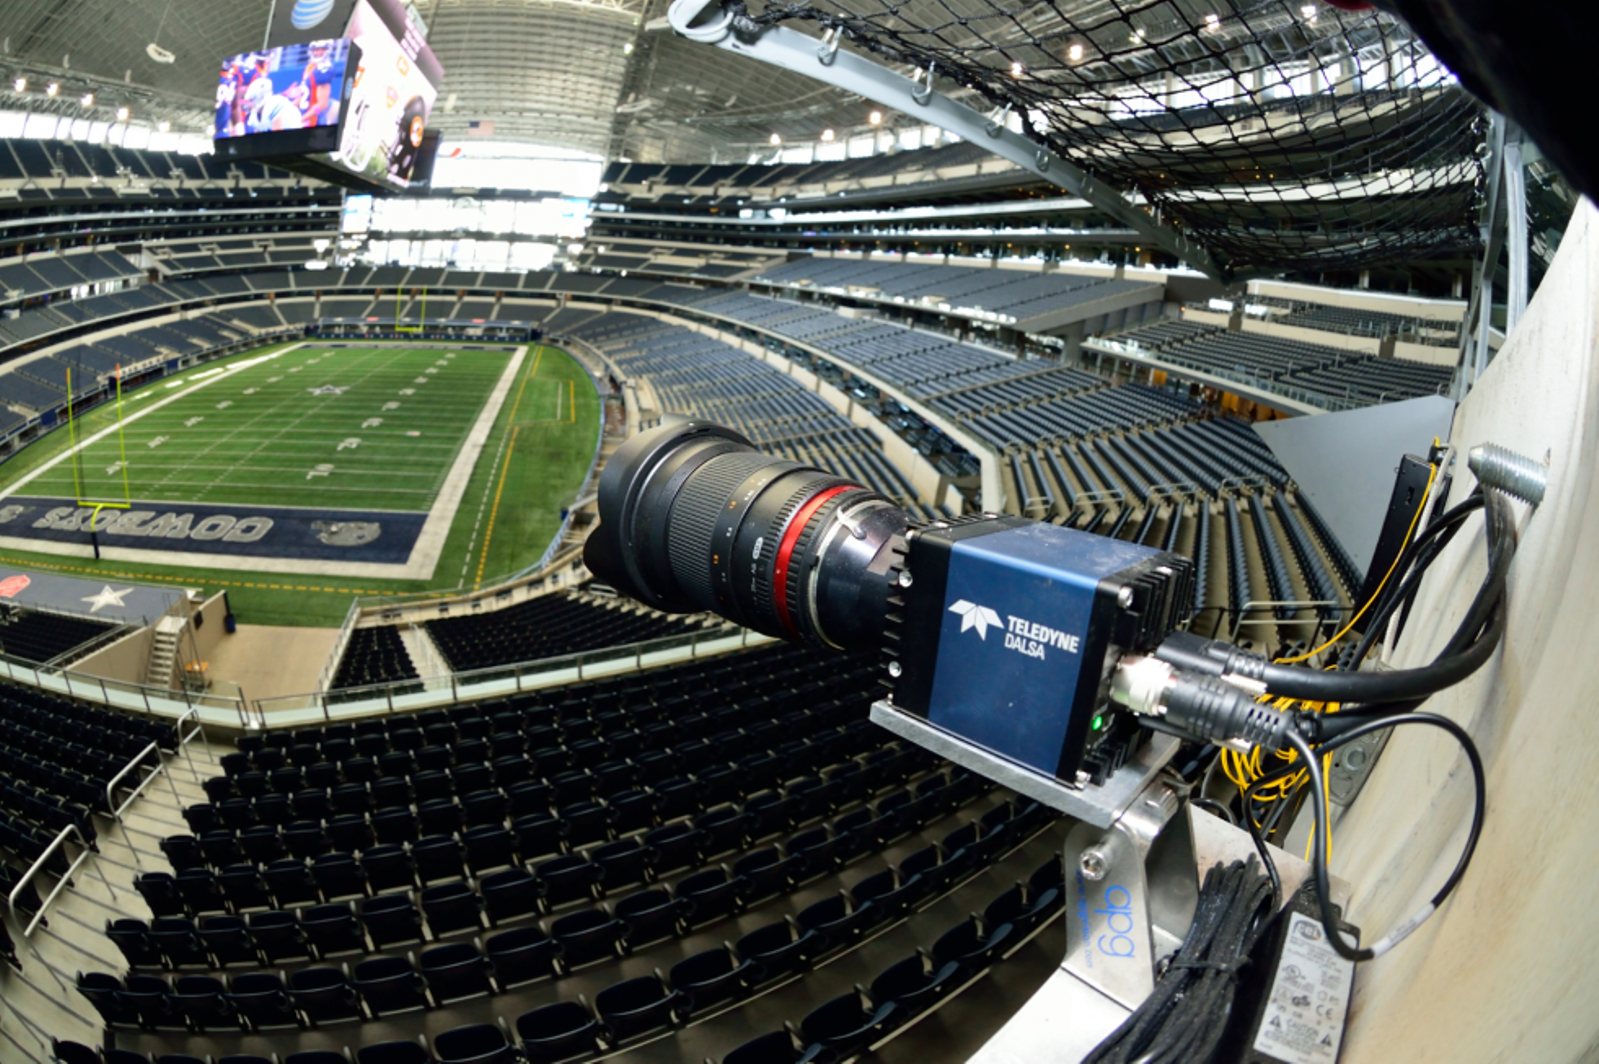 Super-HD cameras encircle the stadium to capture images from every angle to be converted into 3D “voxels.” Photo courtesy of Replay Technologies